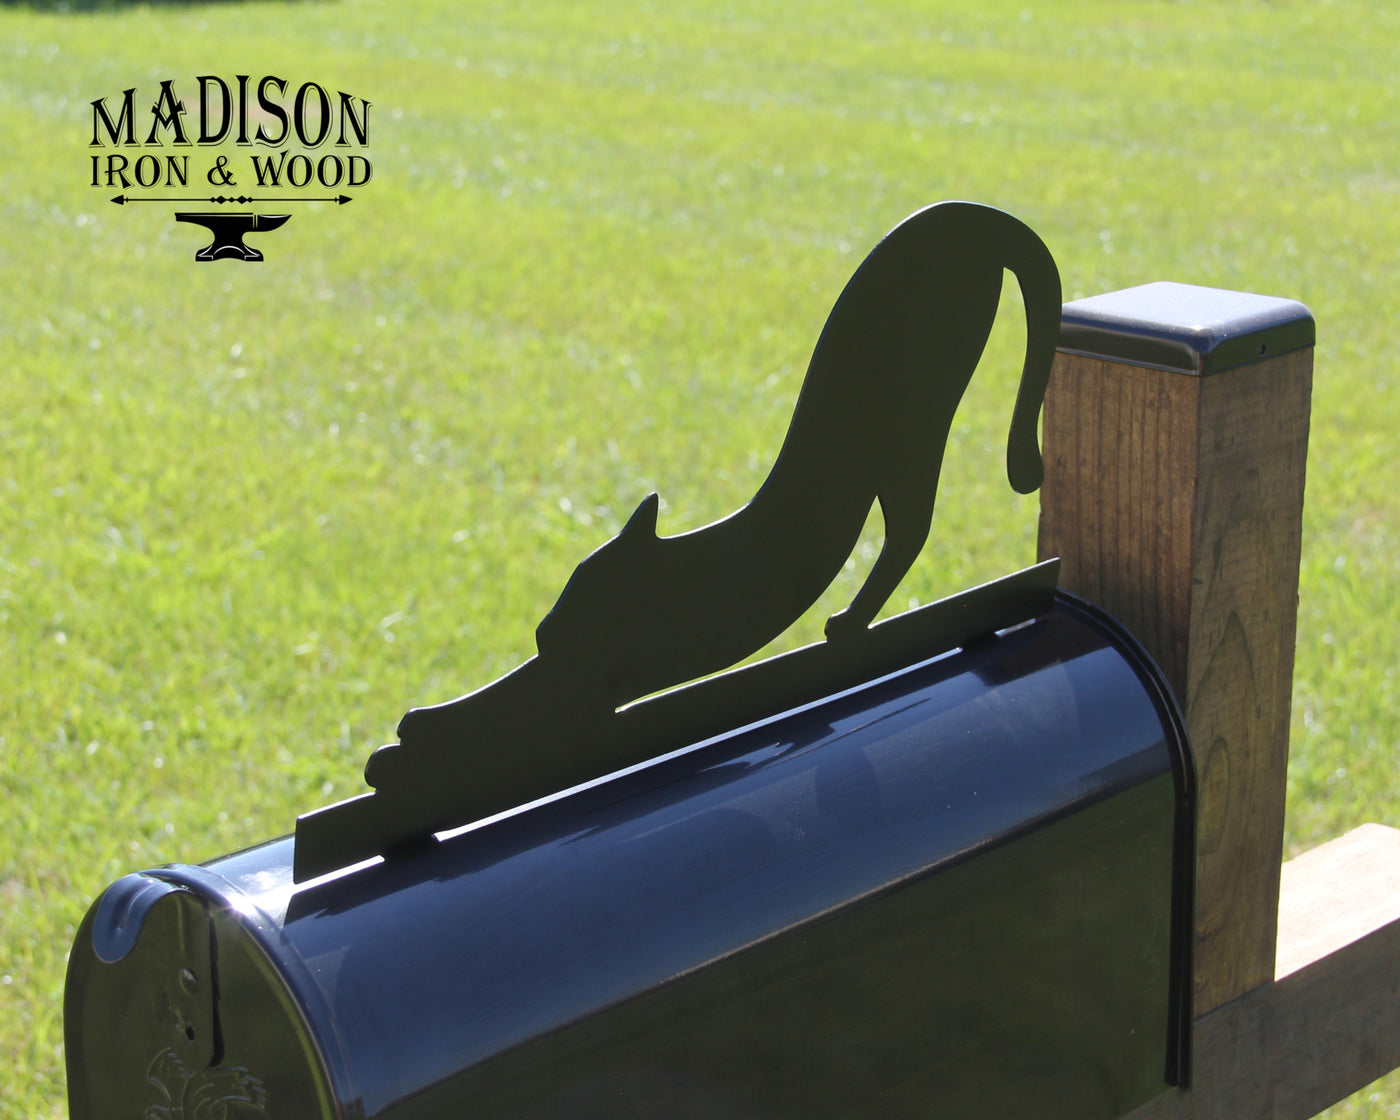 Cat Mailbox Topper - Madison Iron and Wood - Mailbox Post Decor - metal outdoor decor - Steel deocrations - american made products - veteran owned business products - fencing decorations - fencing supplies - custom wall decorations - personalized wall signs - steel - decorative post caps - steel post caps - metal post caps - brackets - structural brackets - home improvement - easter - easter decorations - easter gift - easter yard decor